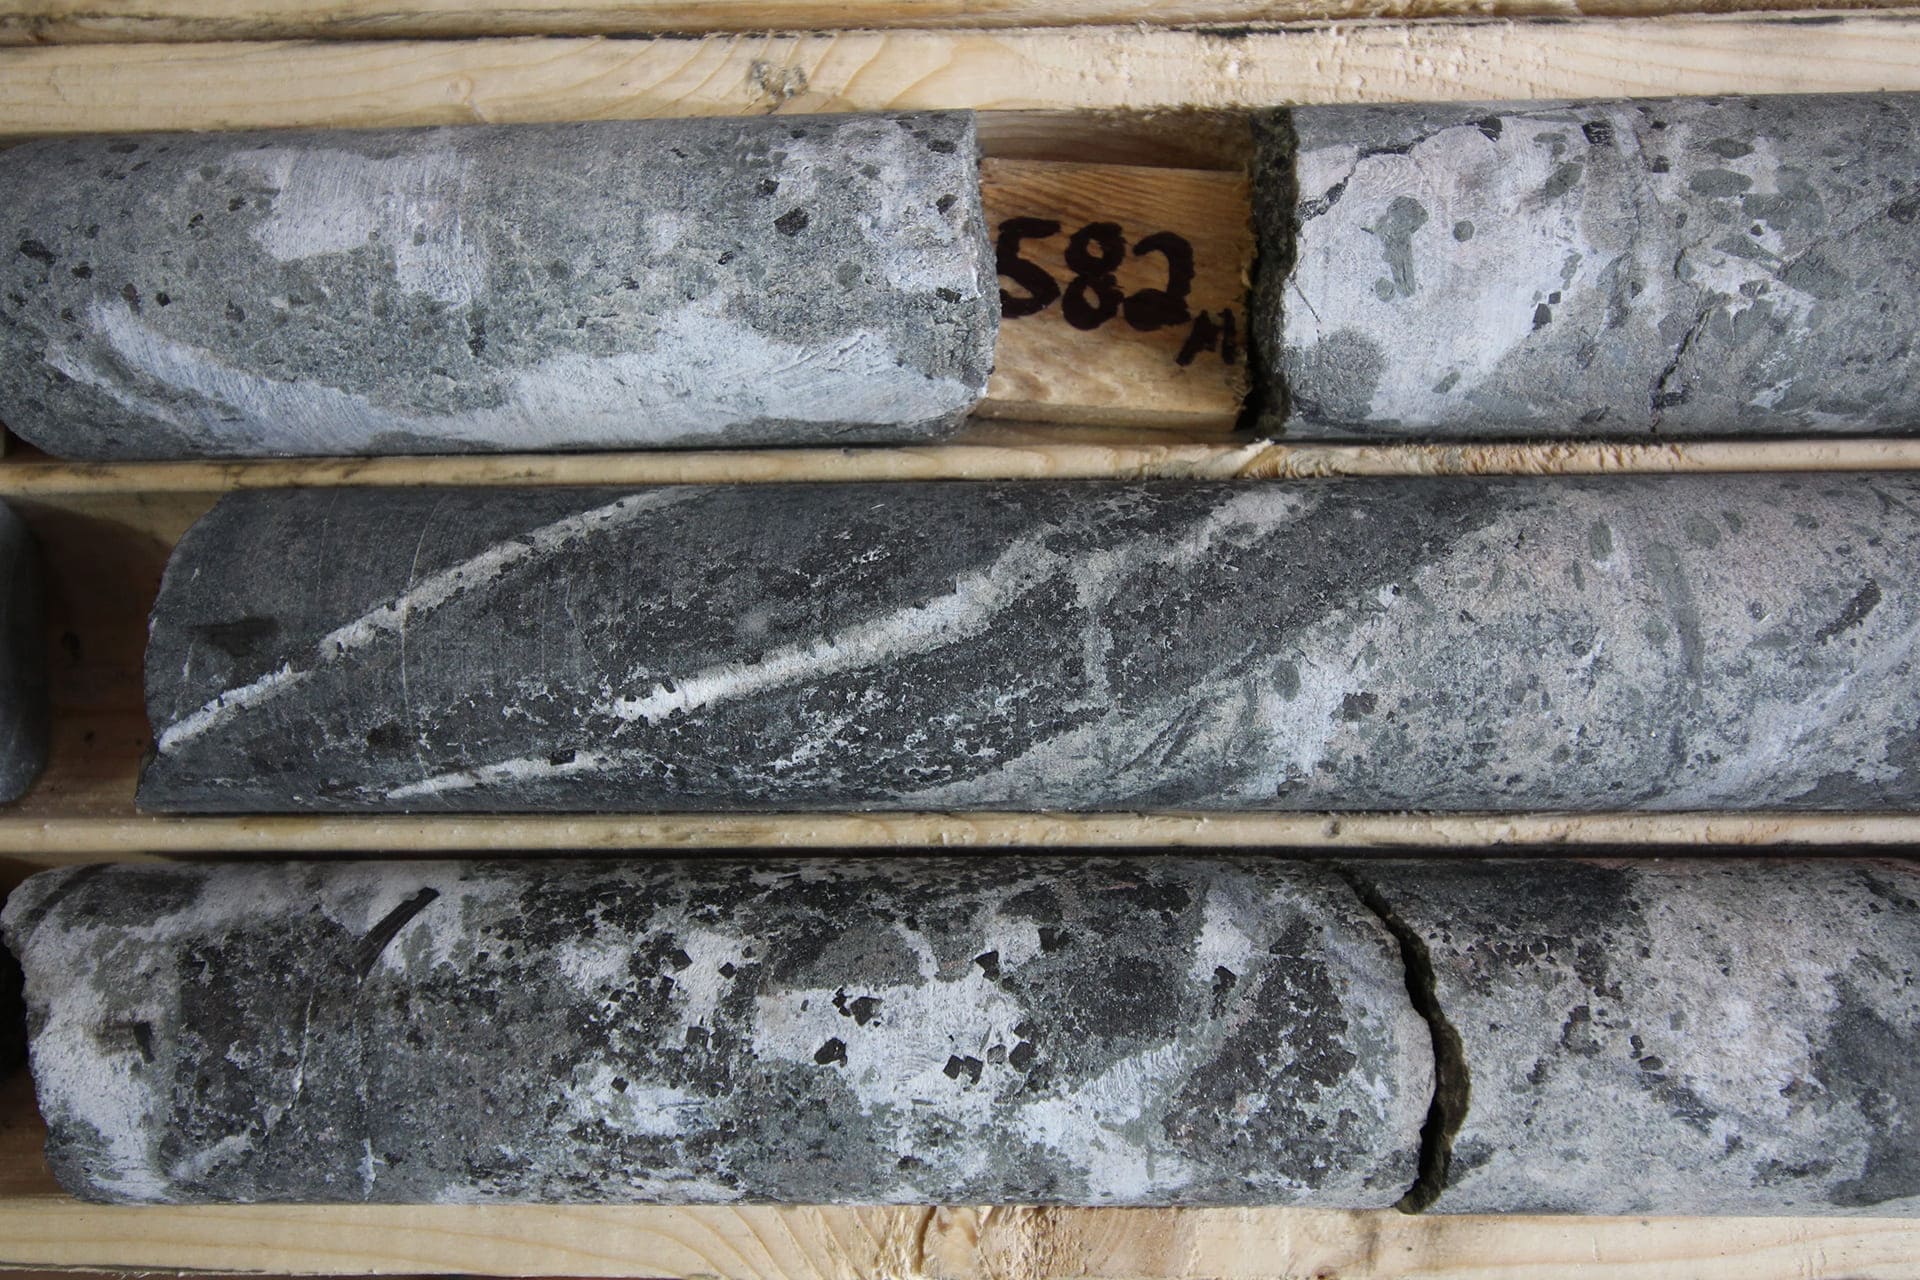 High Density REE mineralization at 582m in Hydrothermal Breccia in Hole 002